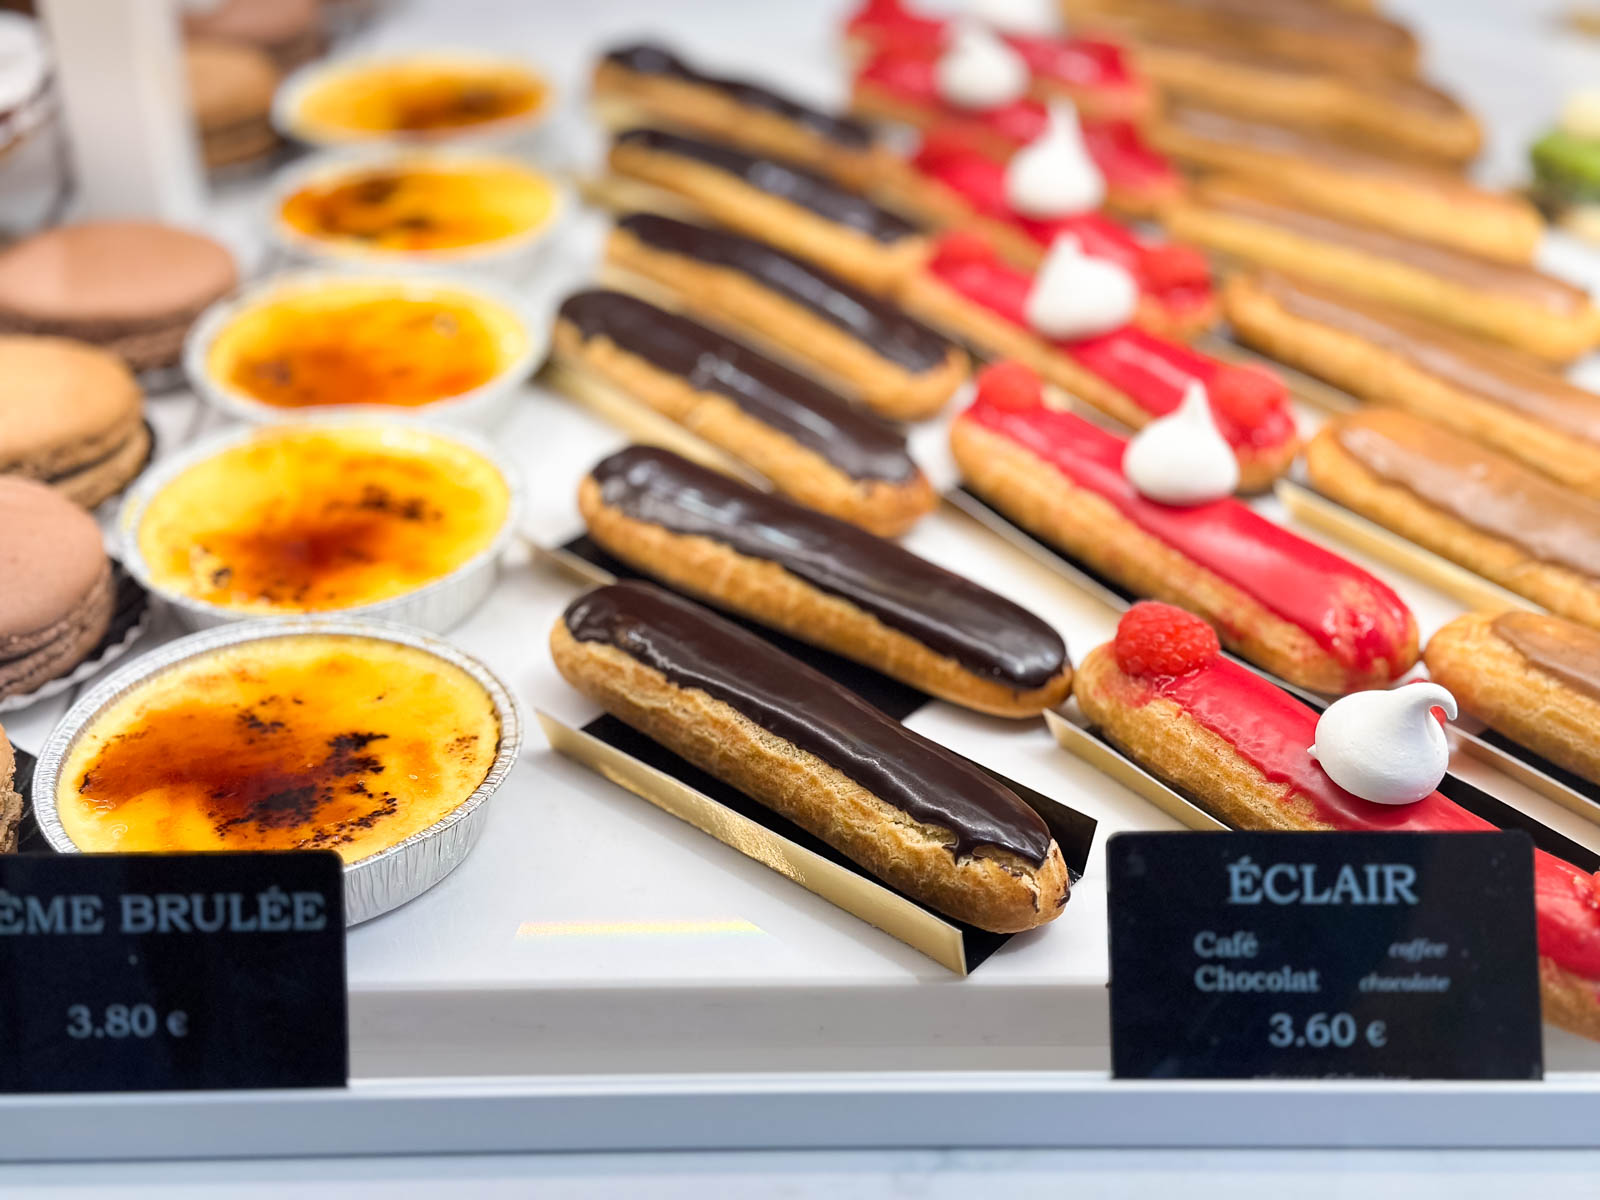 A bakery case has creme brulee and eclairs